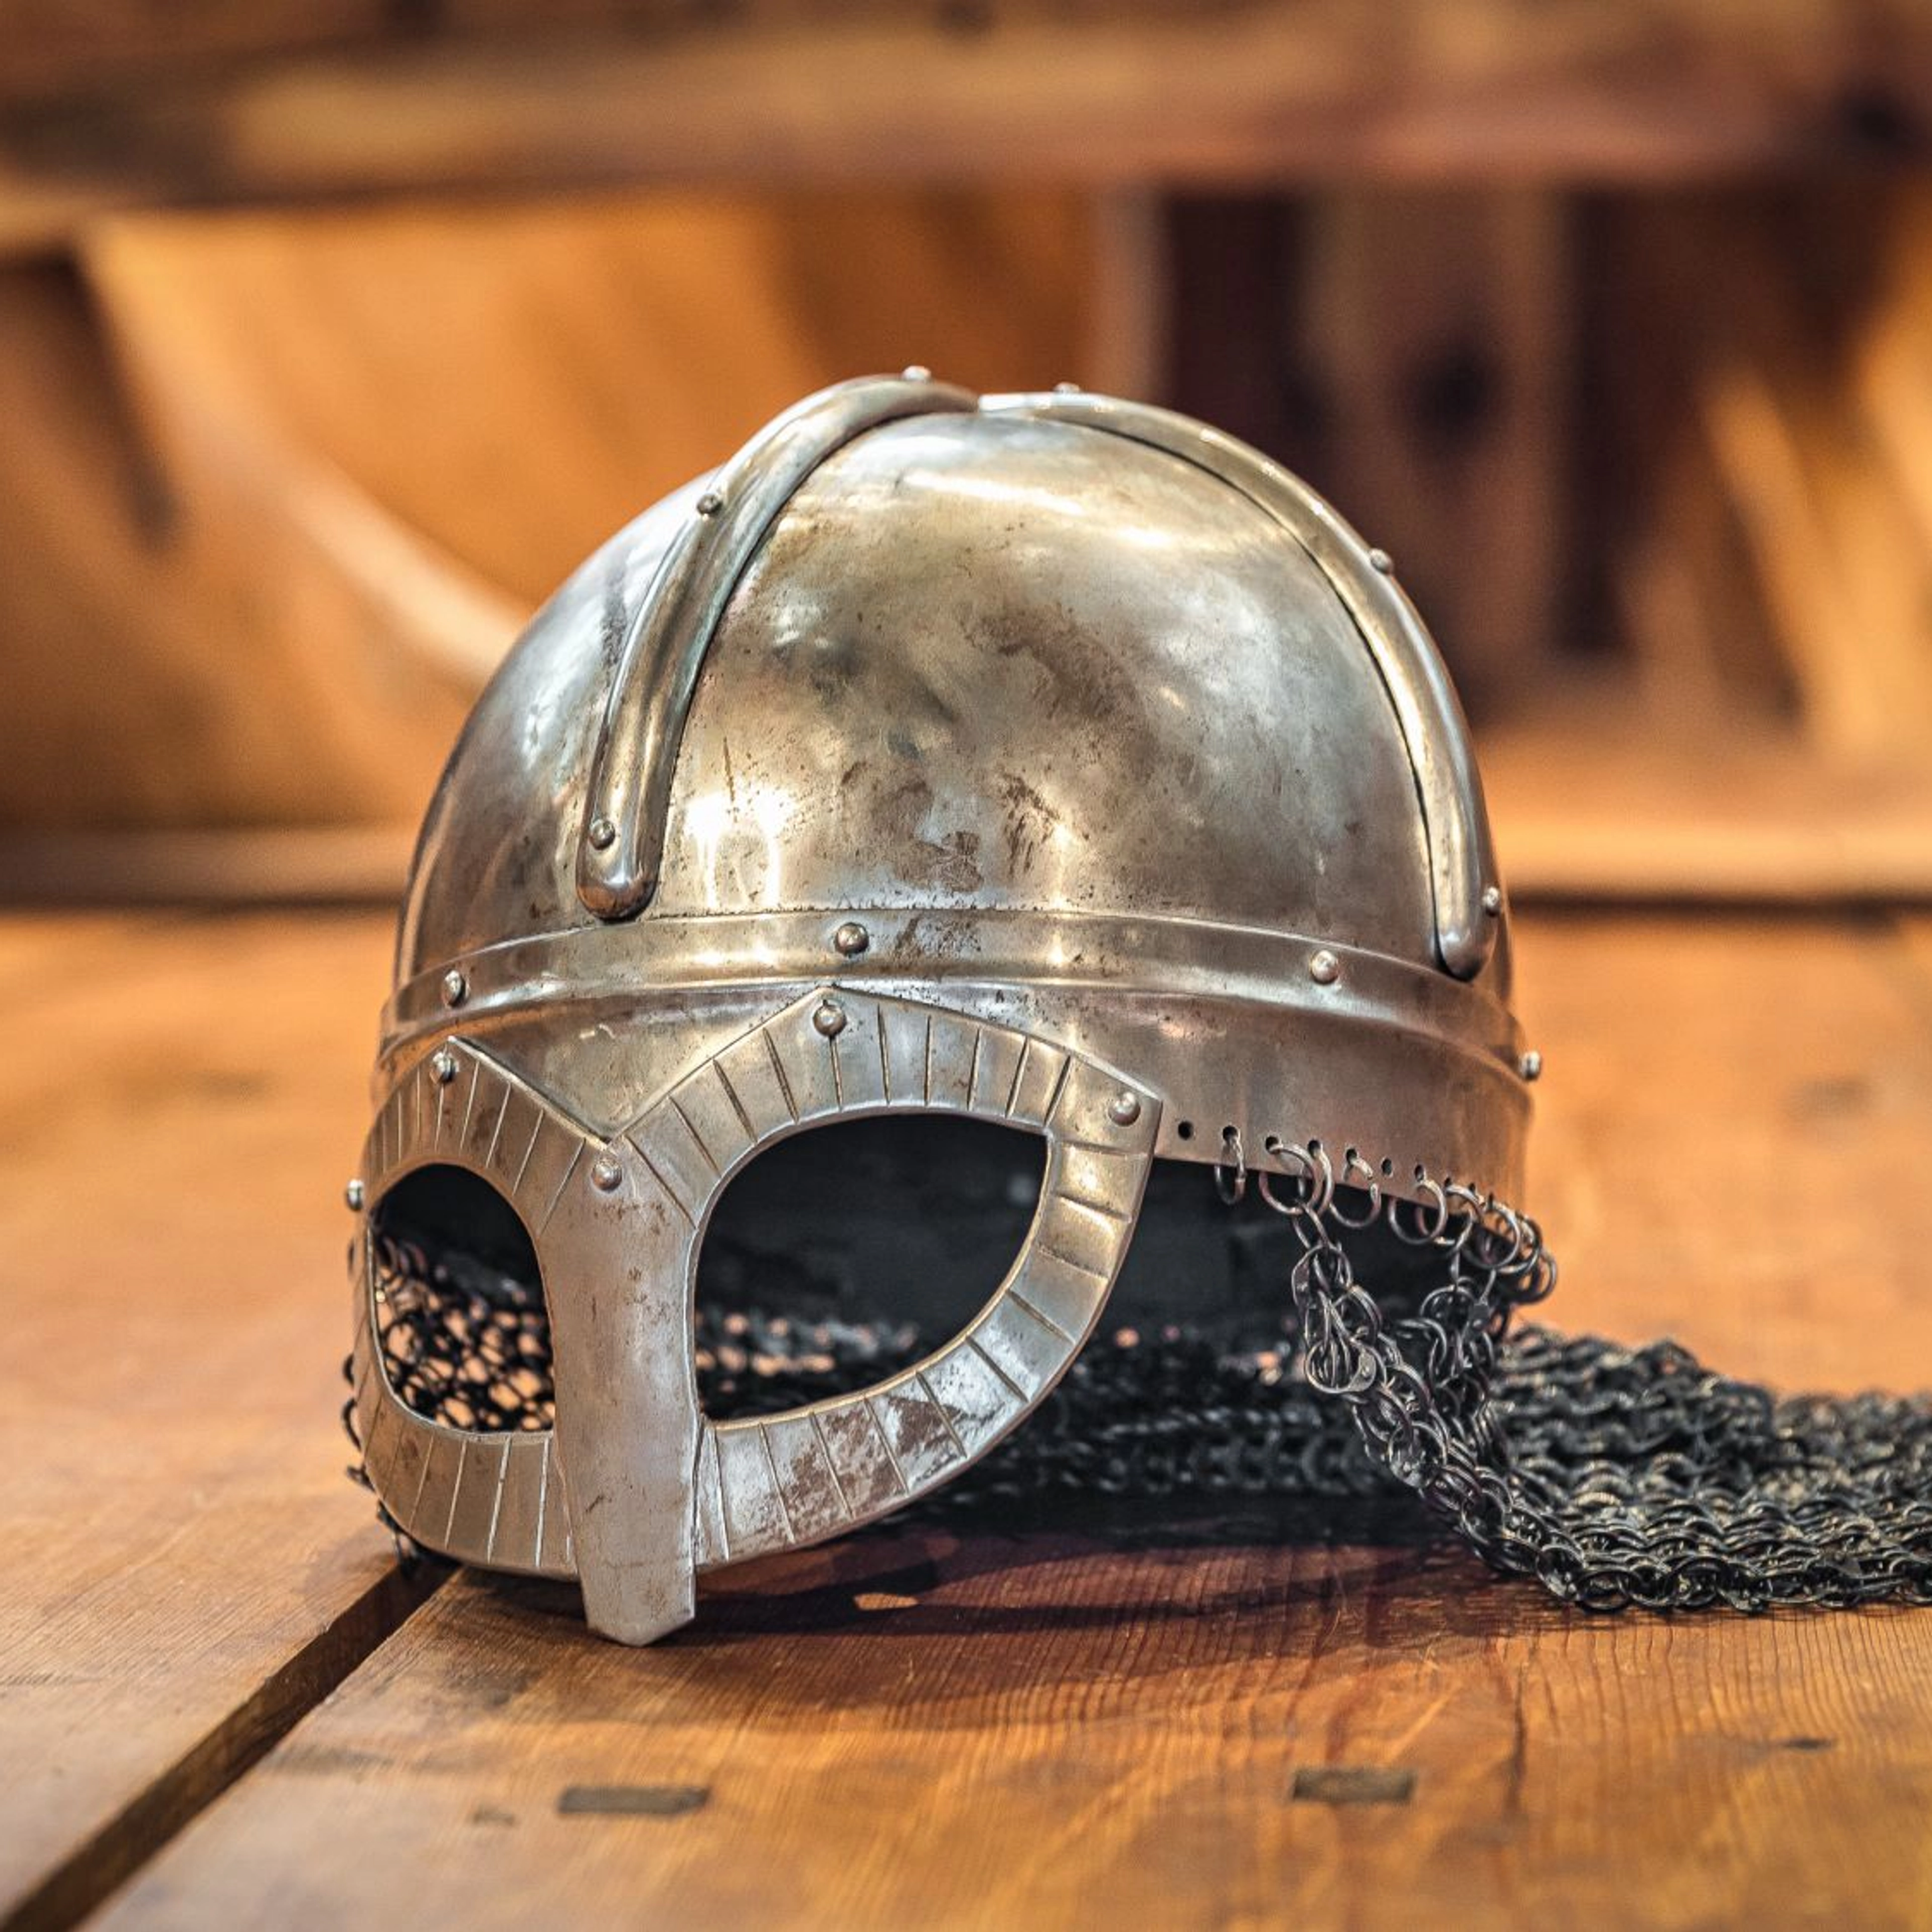 Viking helmet - Connecting to Viking Culture in the Modern Day - NOrway